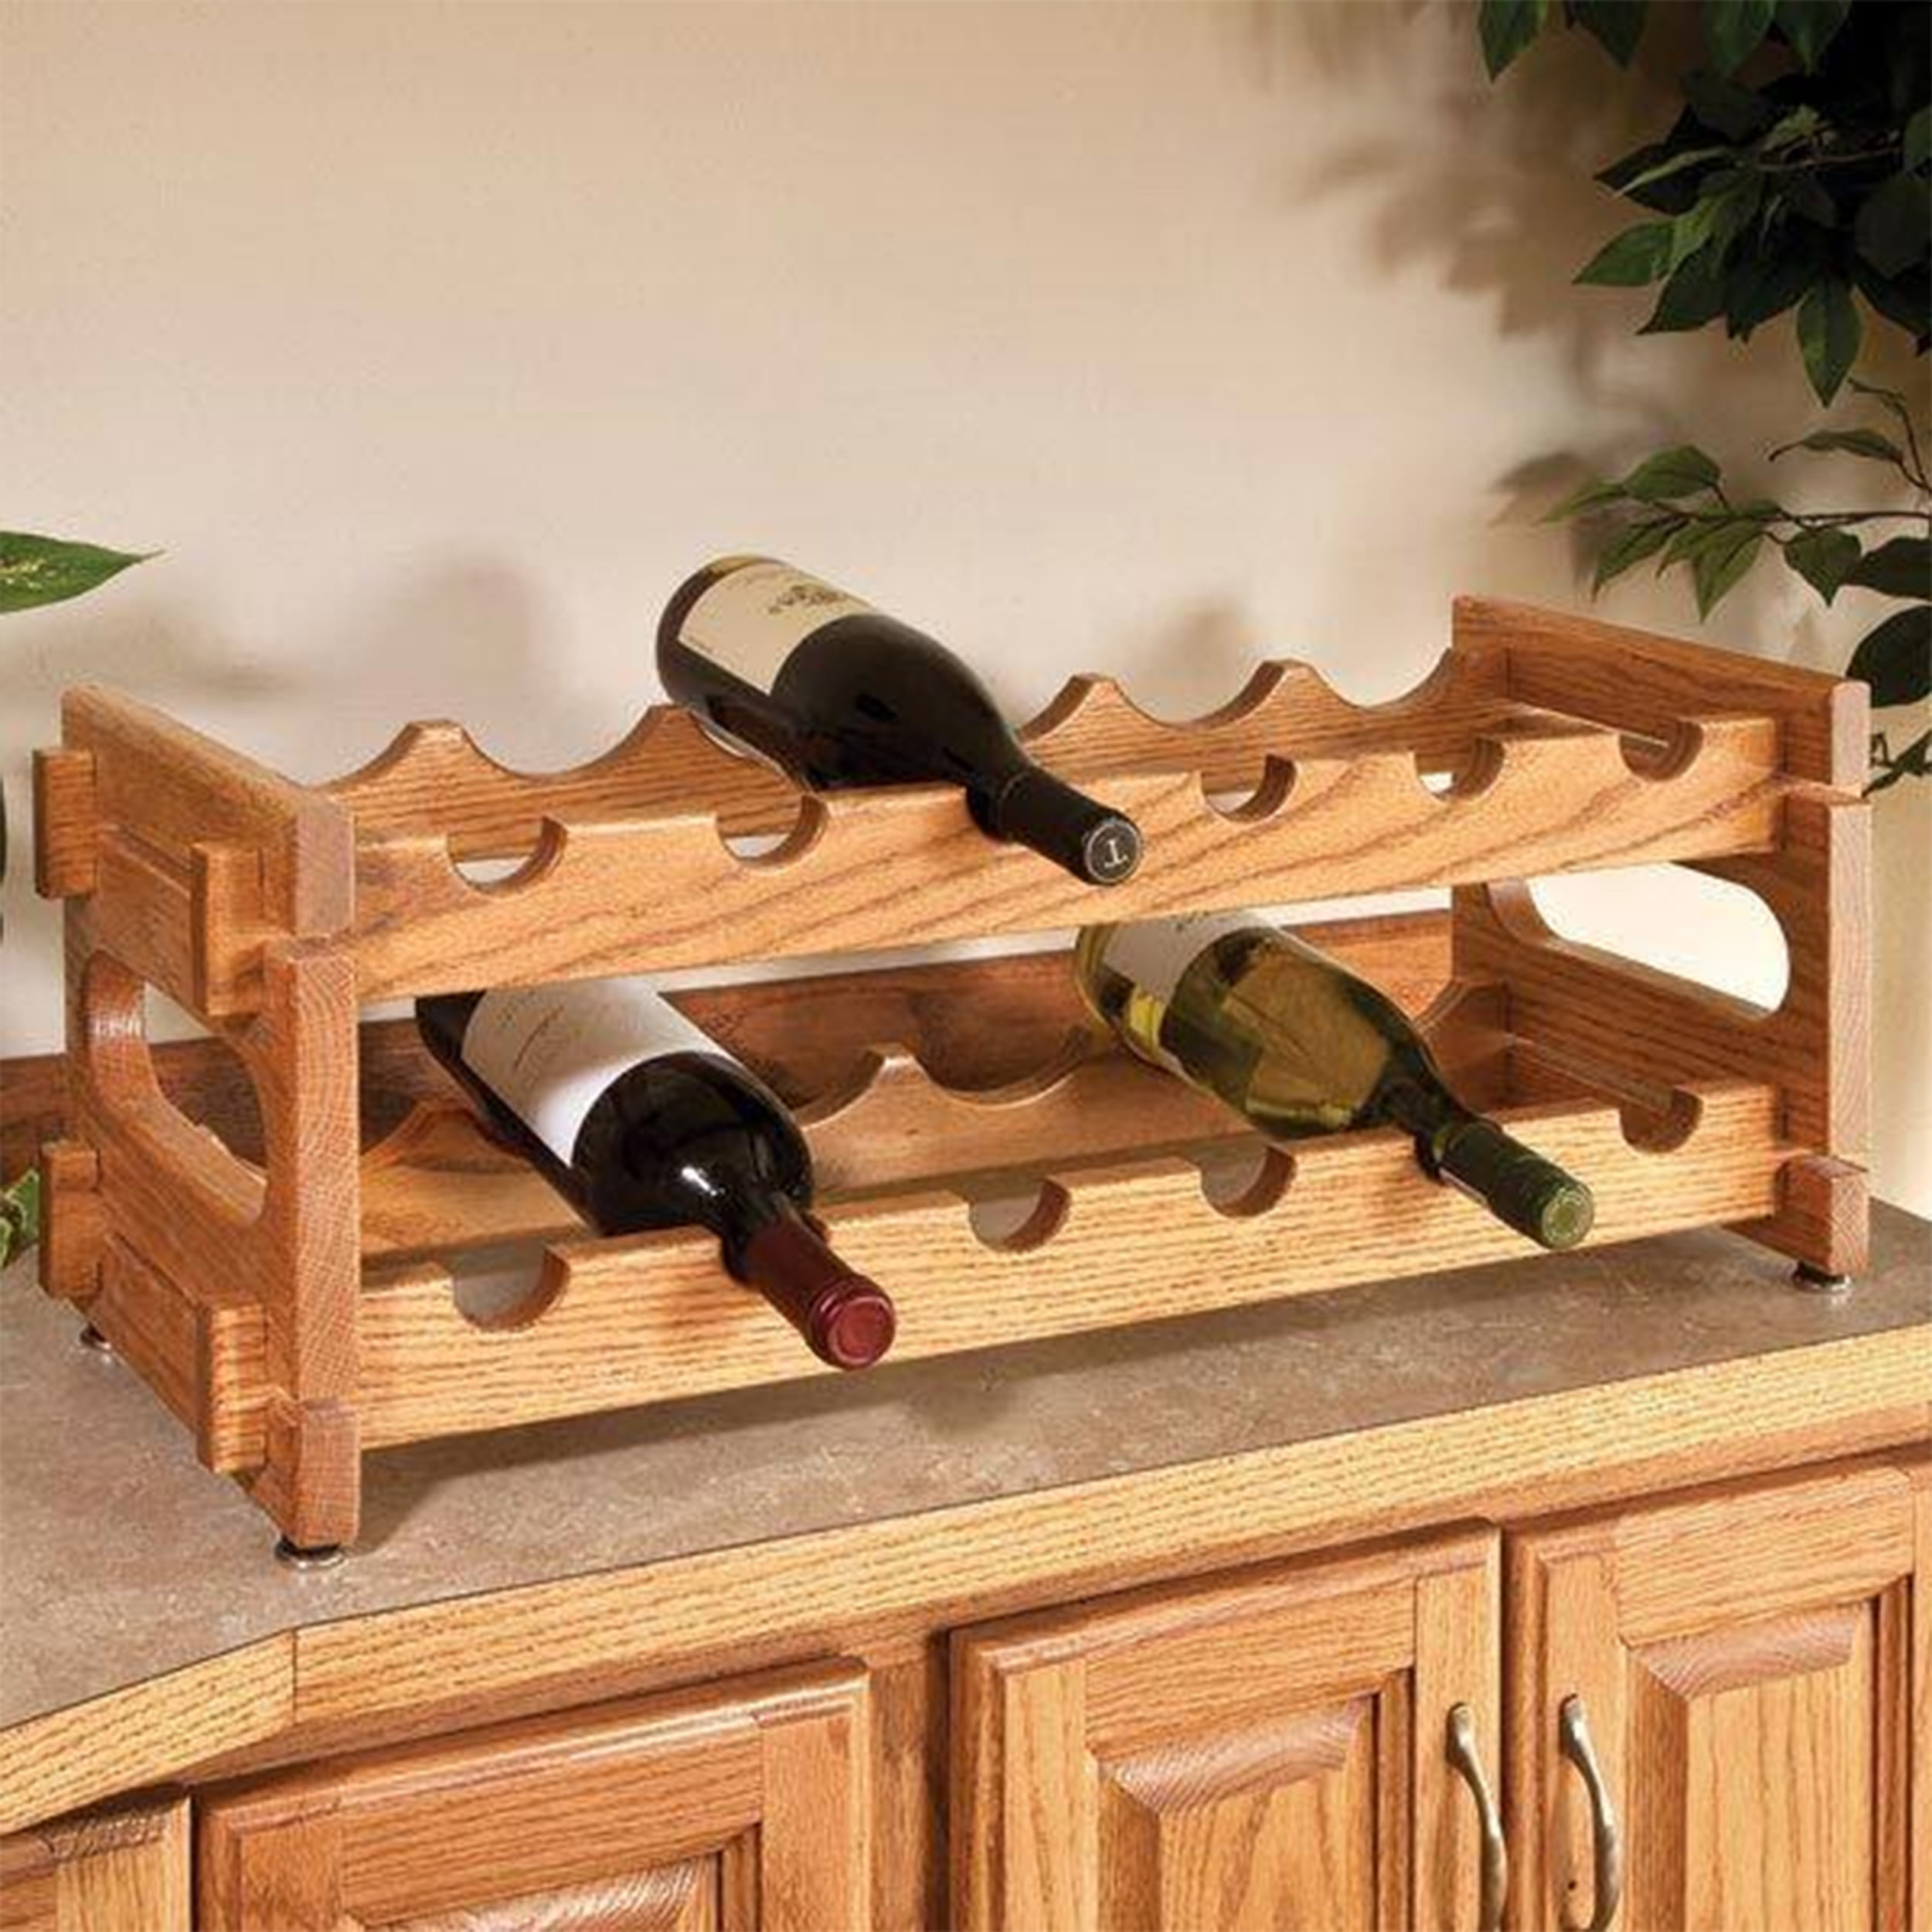 11.5 x 47.5 x 8 cm Relaxdays Bamboo Wine Rack Holder for 6 Standard Bottles with Original Design and Horizontal Orientation Wood Brown